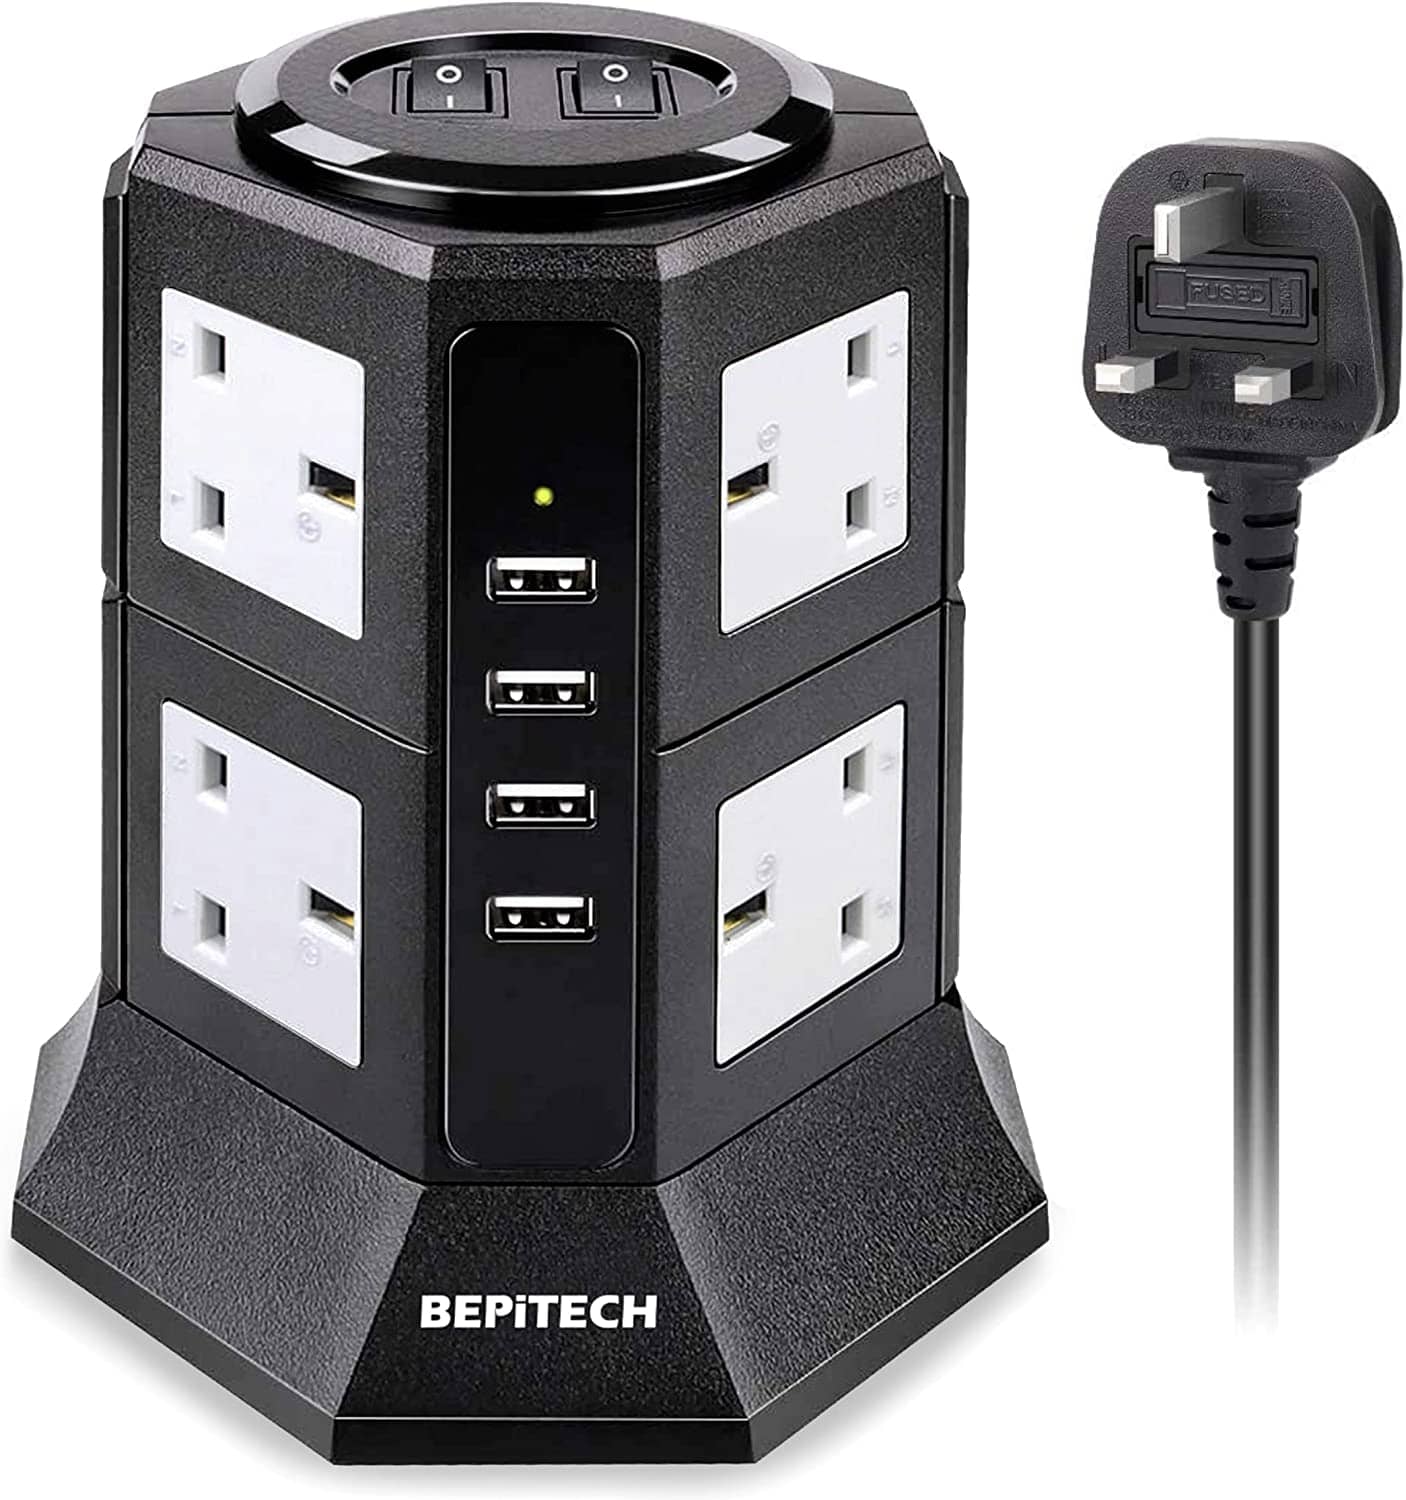 BEPiTECH Power Extension Cord, 8-Power Socket 10 Ampere with 4 USB Charger Station, Office Supplies Protected Extension Cable, Fire Retardant Multi-Plug Tower, Switched Power Strip (black) - DealYaSteal